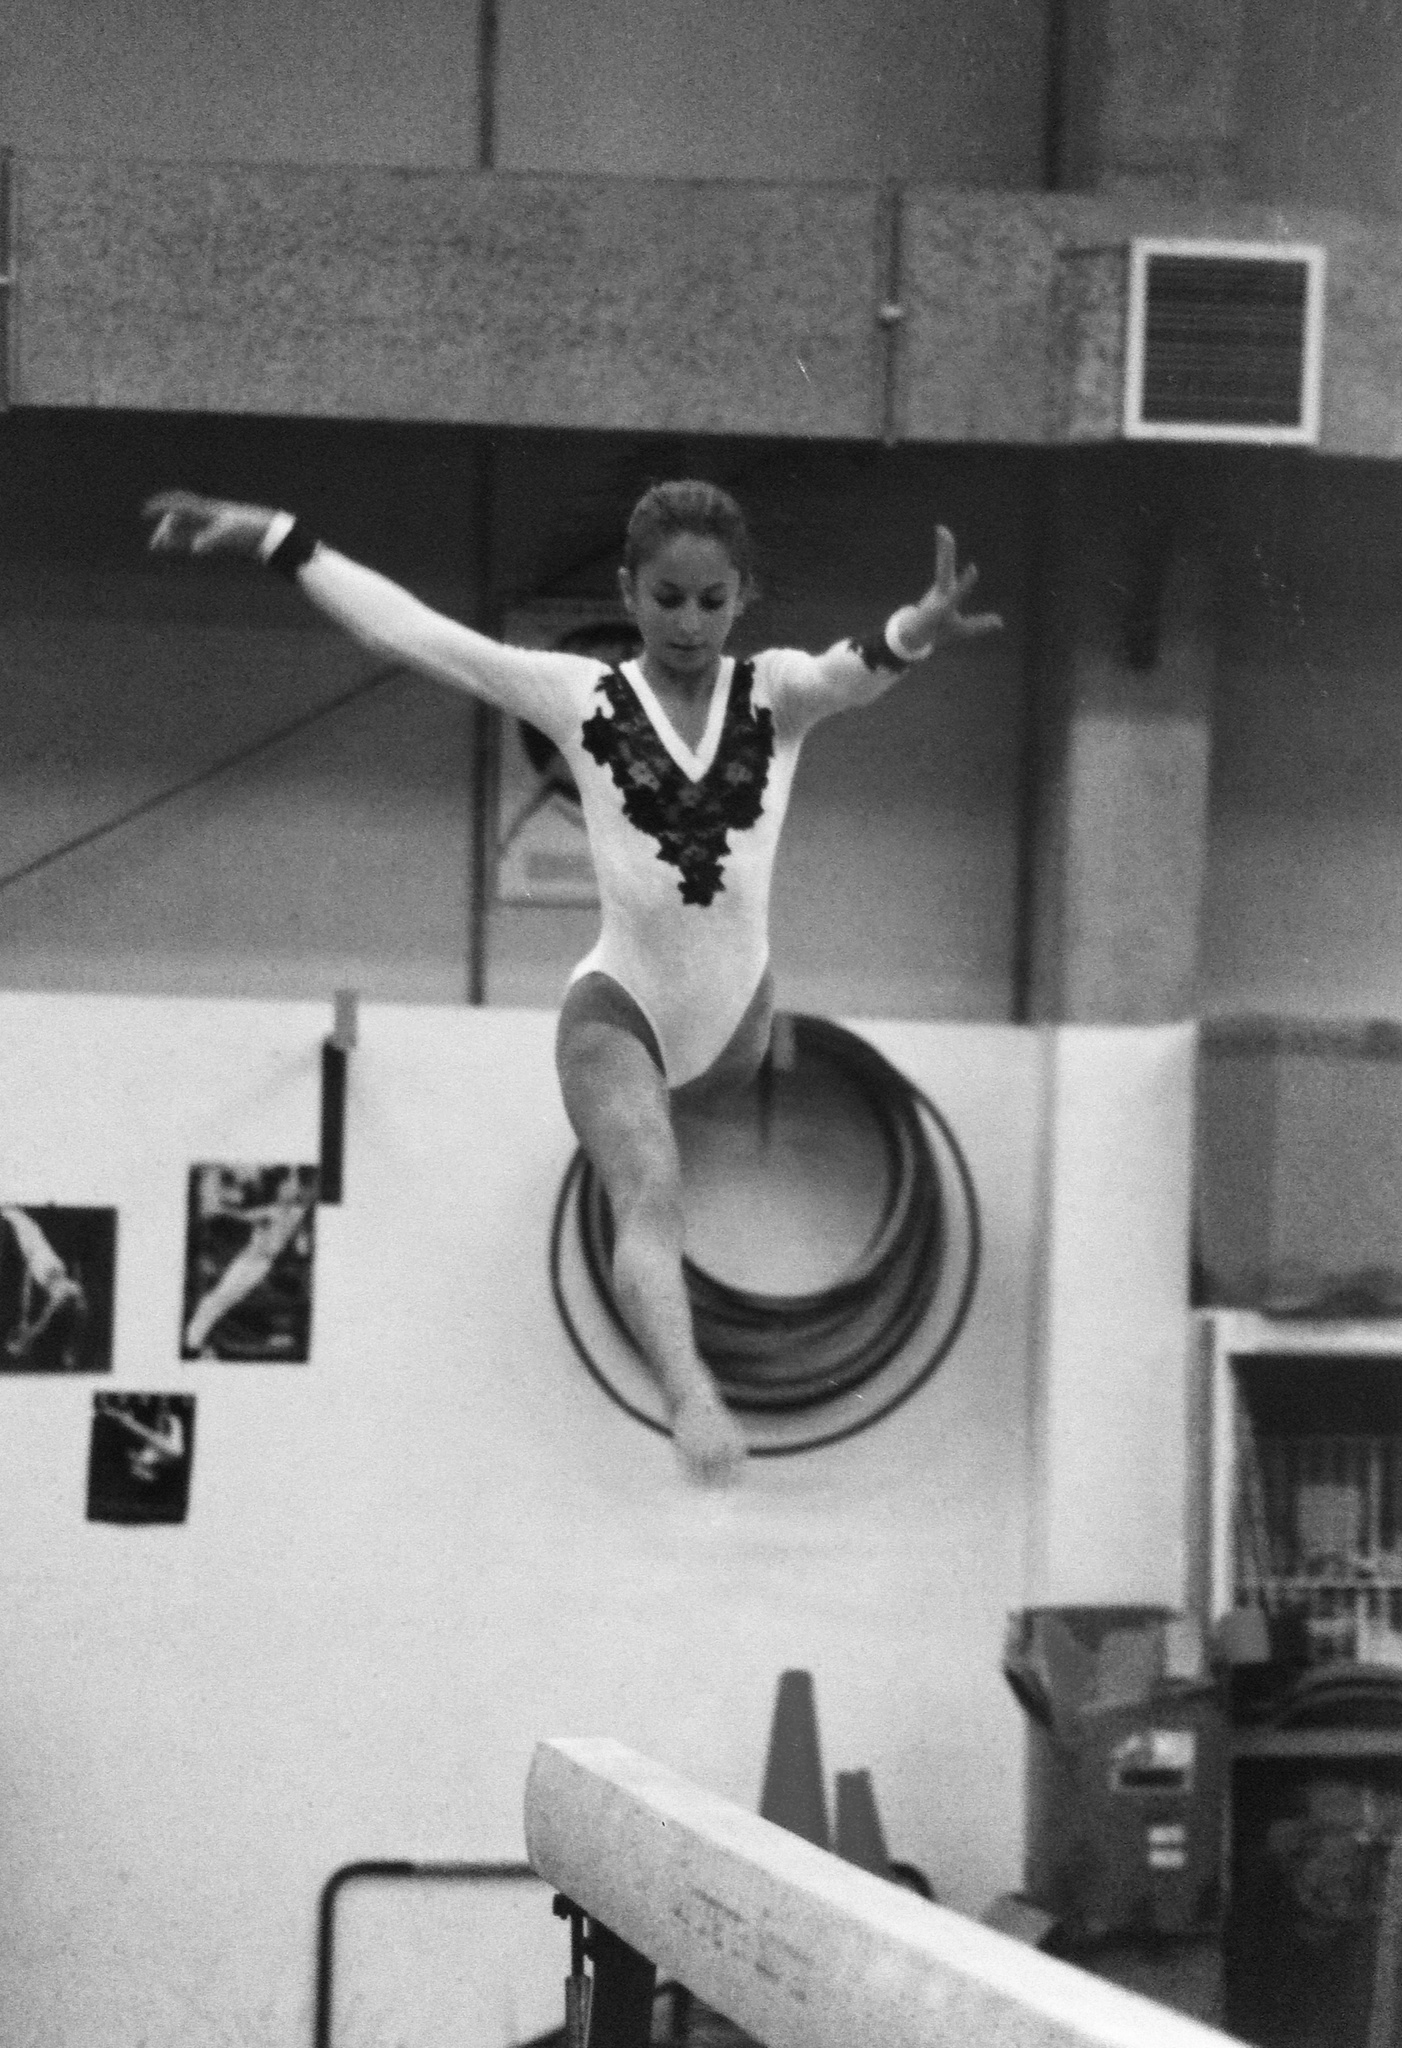 Claire Heafford pictured during her time as a gymnast